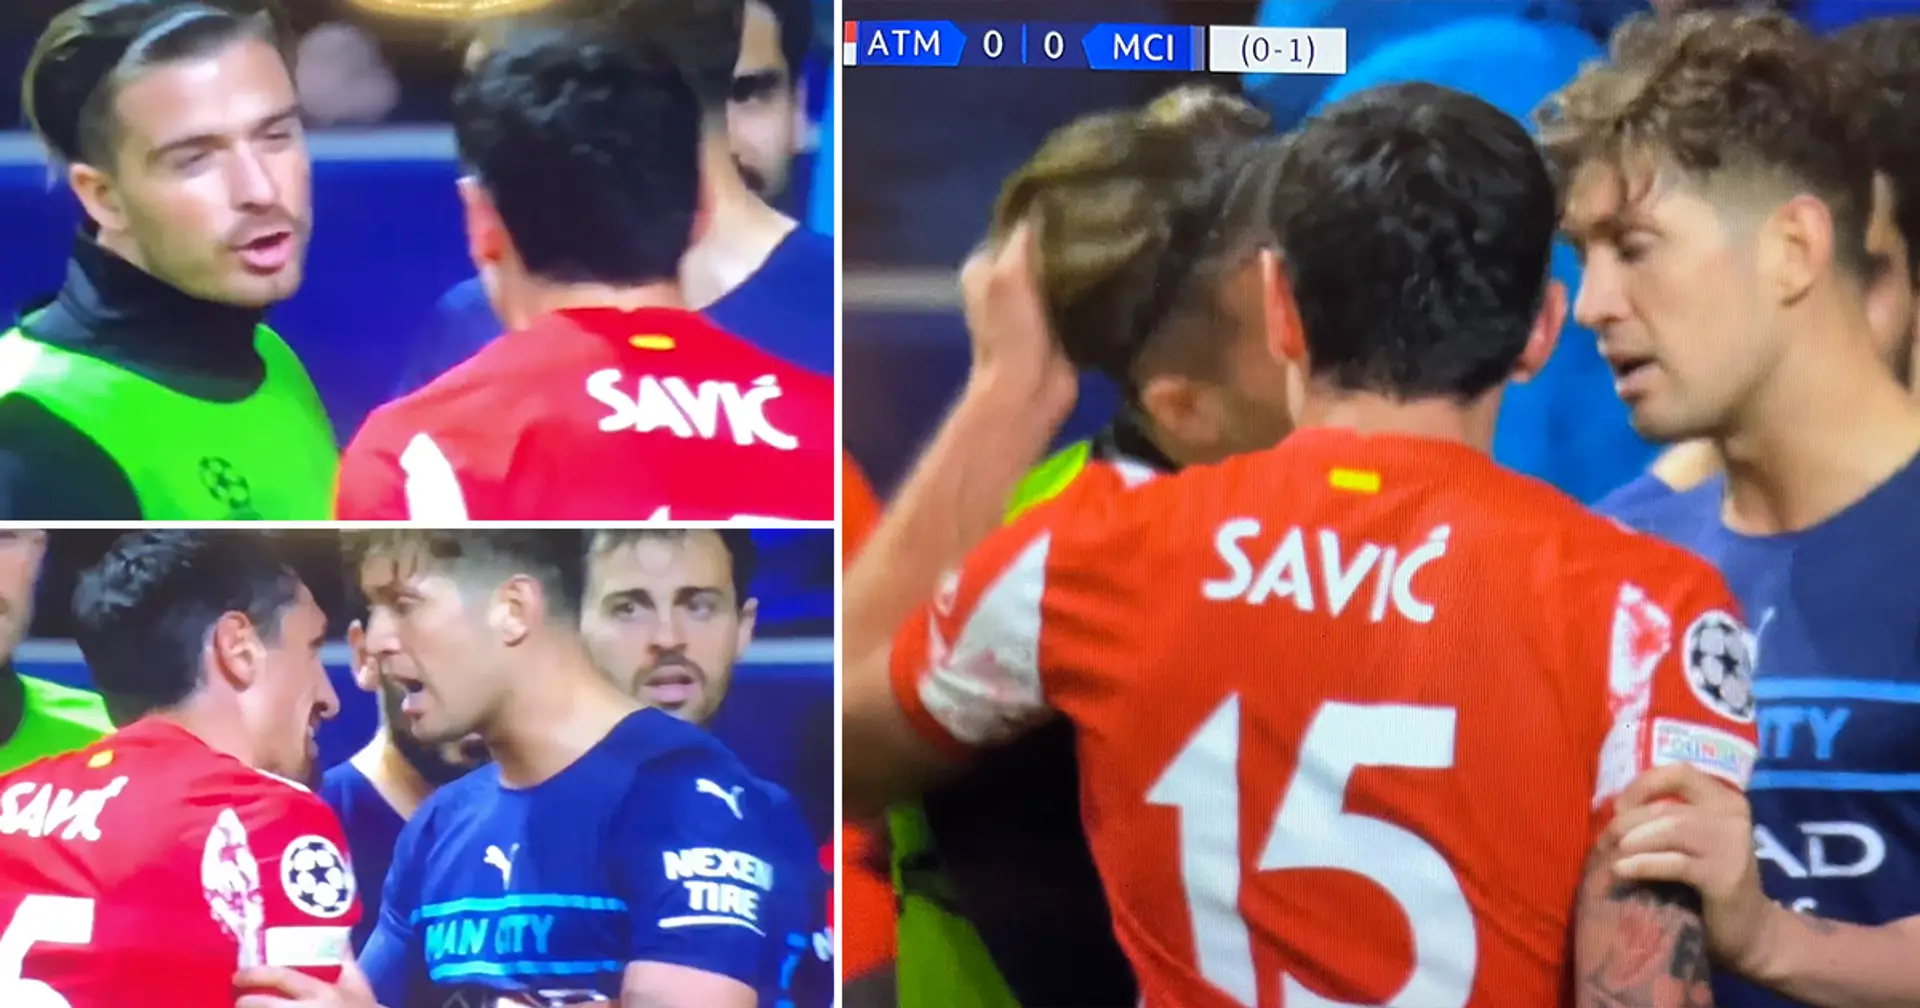 Savic roughly pulls Grealish hair during the game, players clash in tunnel with police involved